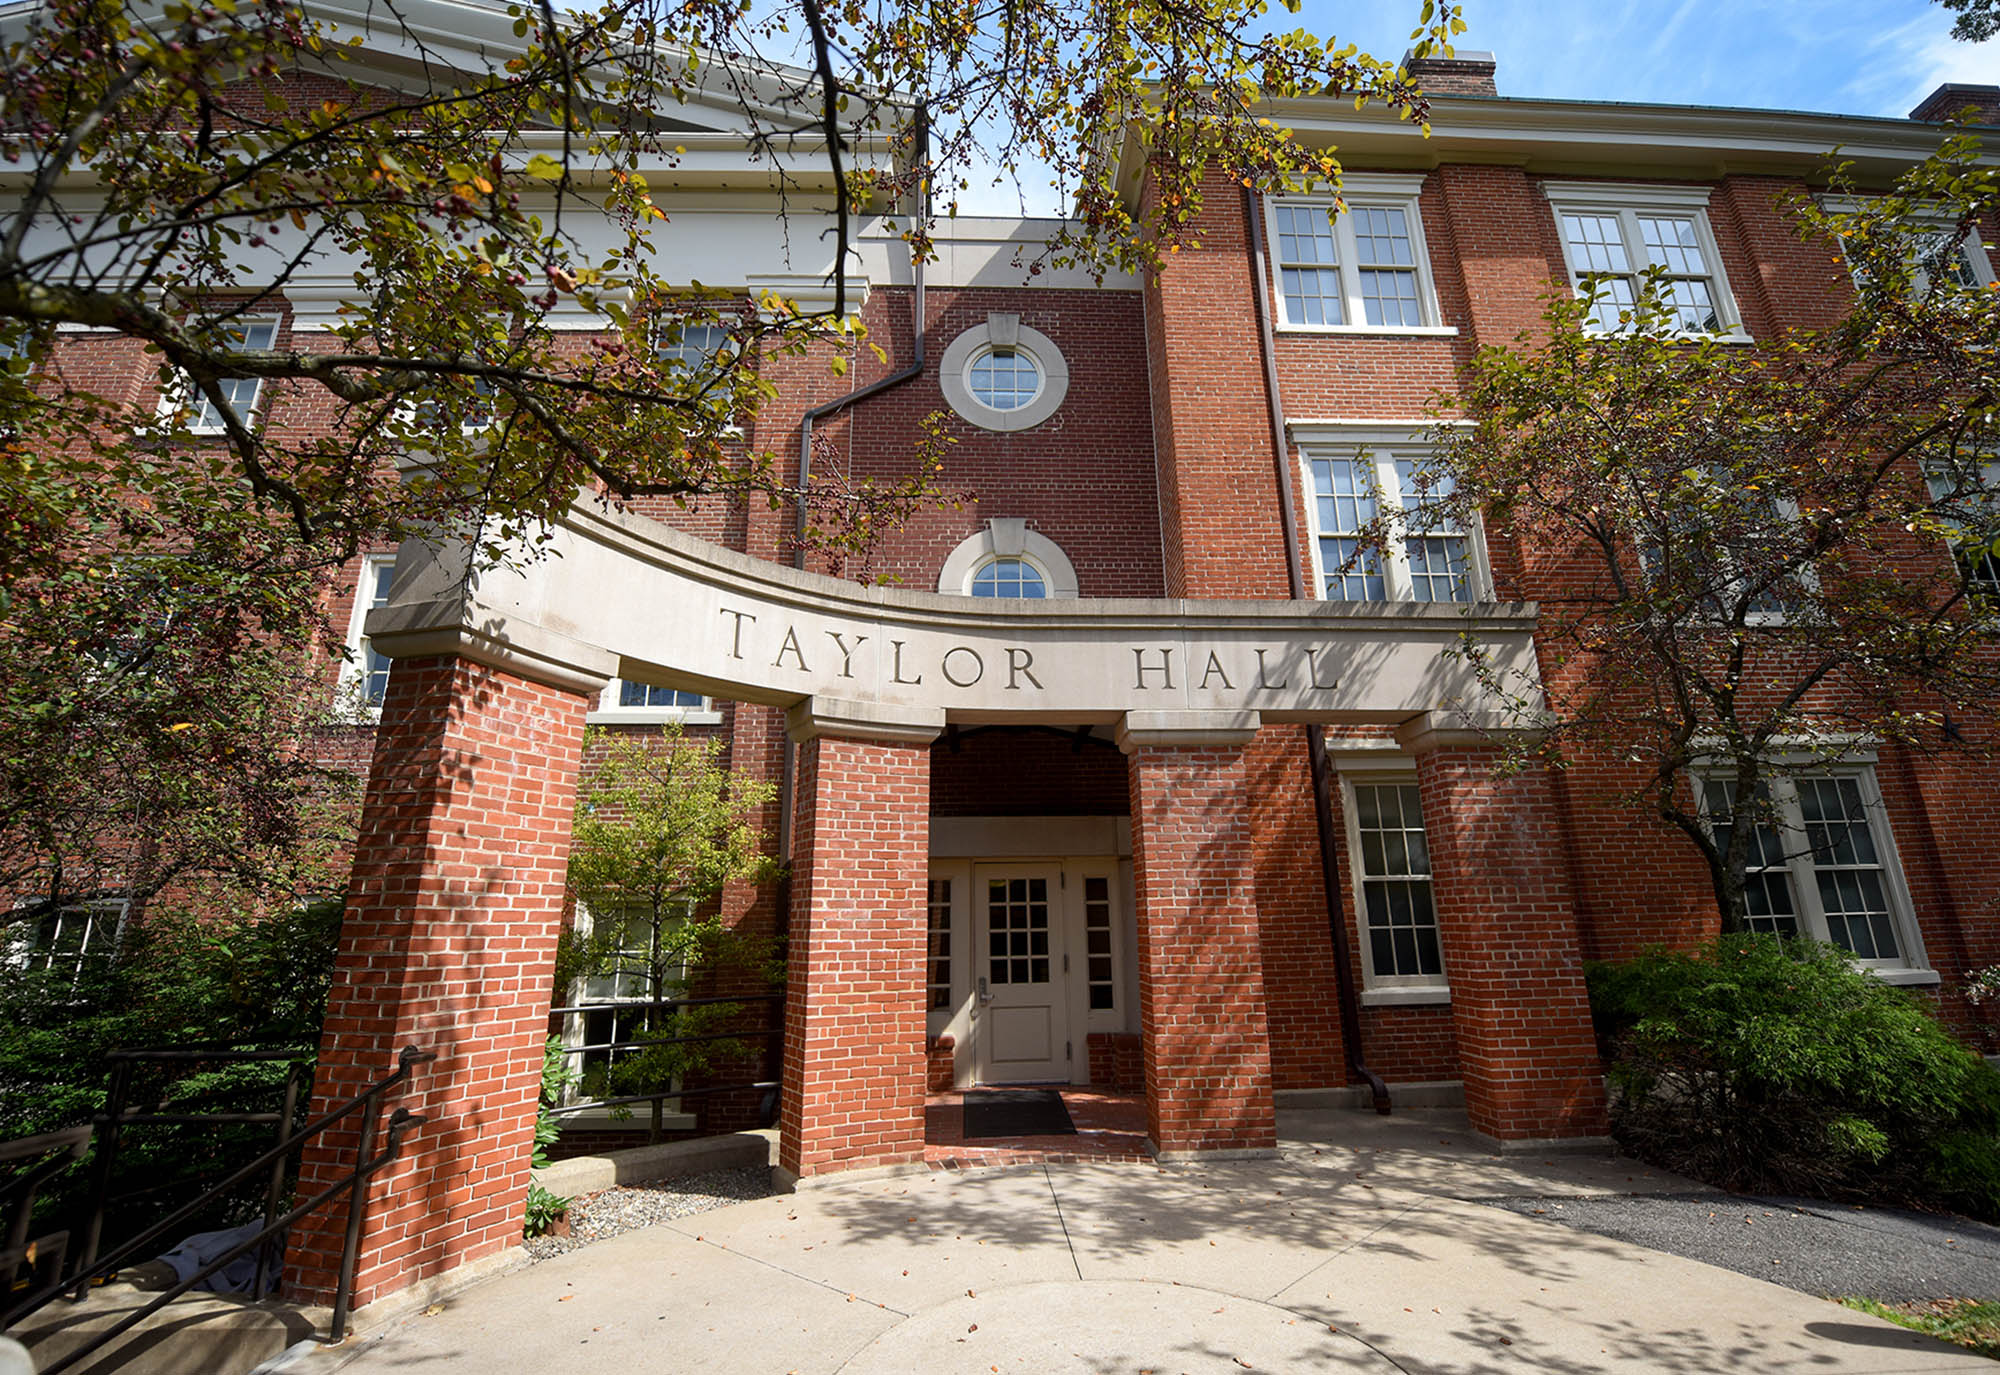 The Academy Building, now Taylor Hall, was the site of Bucknell’s first Commencement on Aug. 20, 1851.